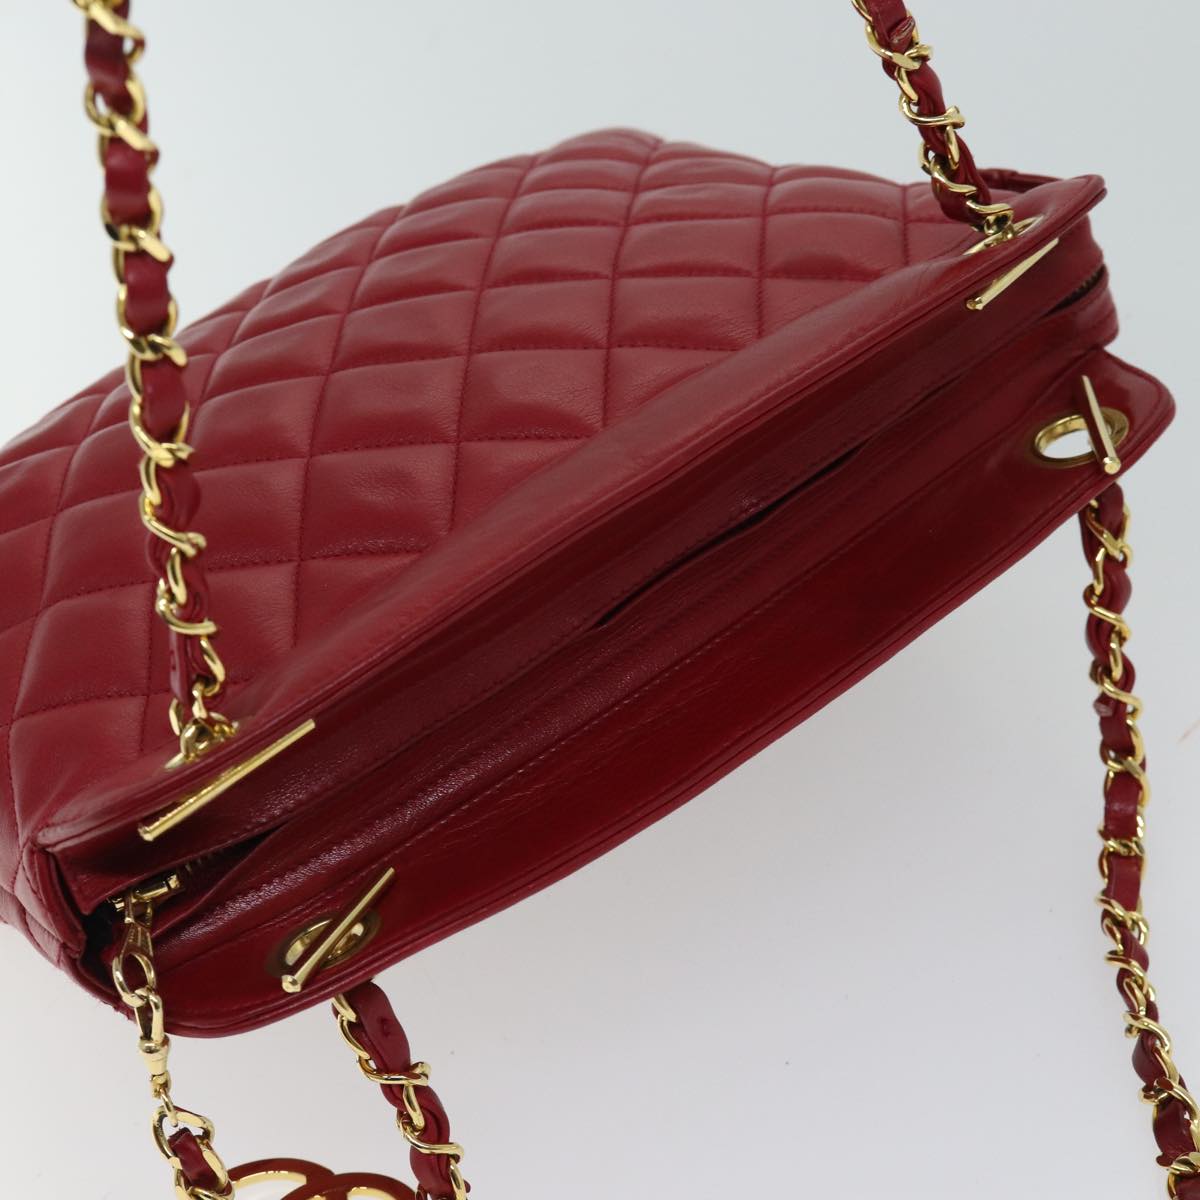 CHANEL Matelasse Chain Shoulder Bag Leather Red CC Auth yk11662